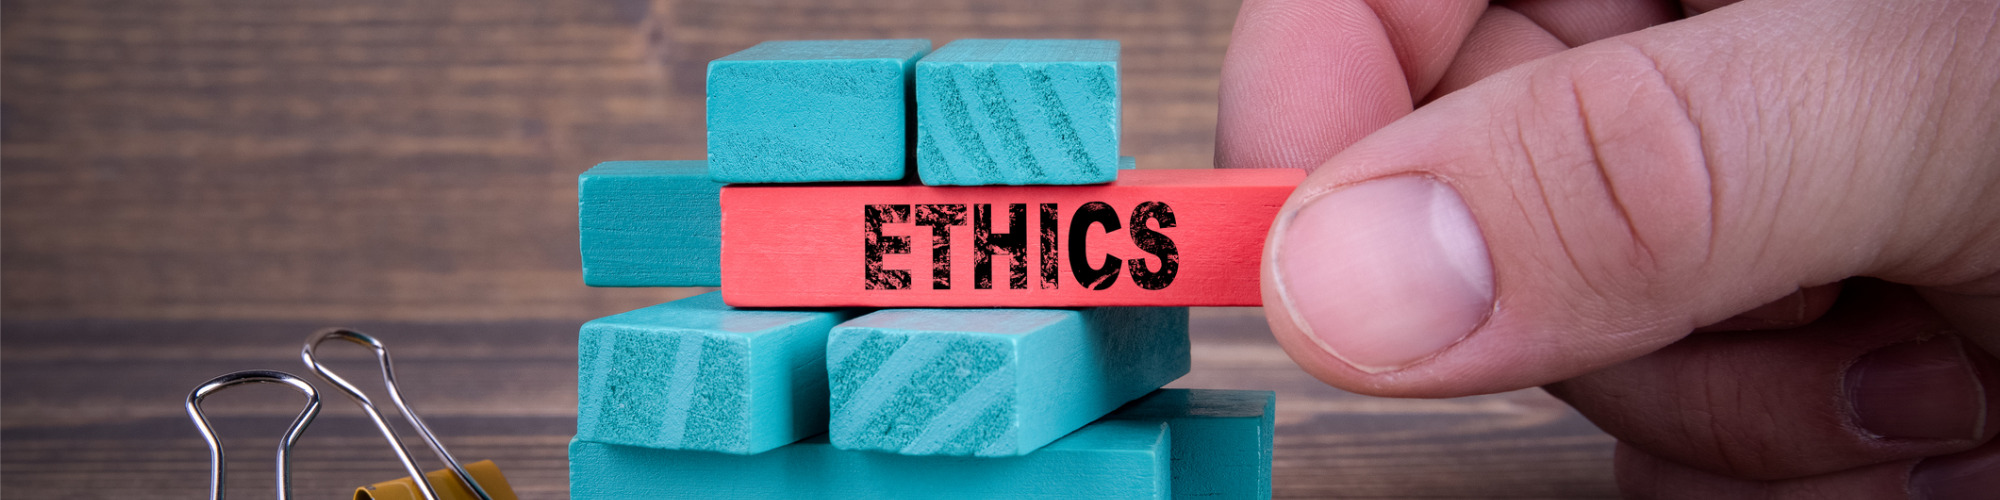 RICS Ethical Standards - A Guide for Surveyors